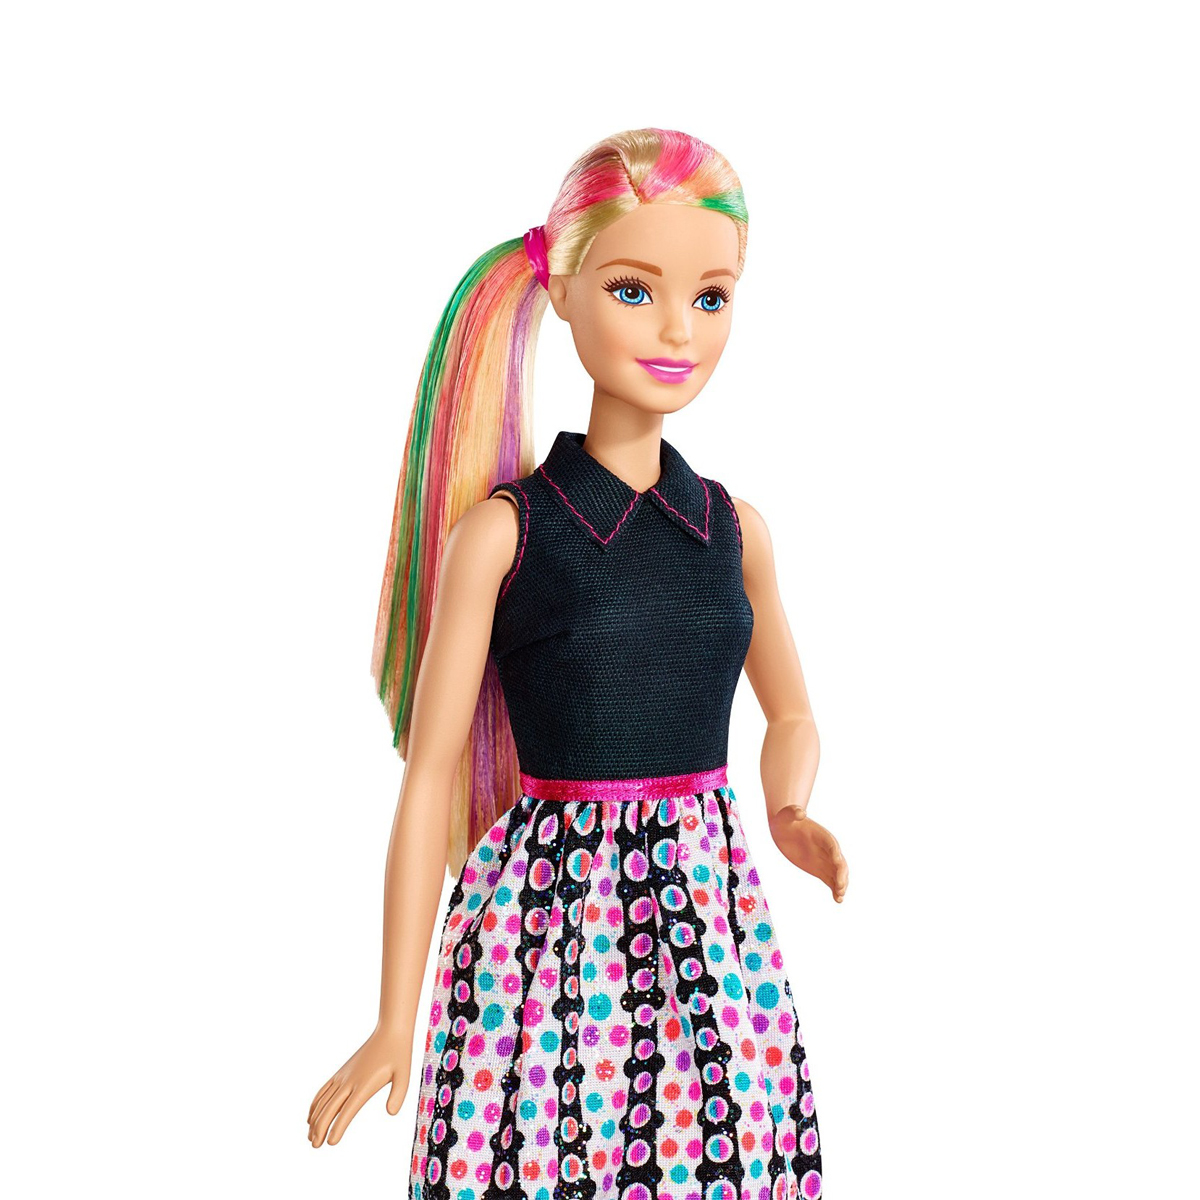 Barbie Spring Hair Feature Doll, Multi Color